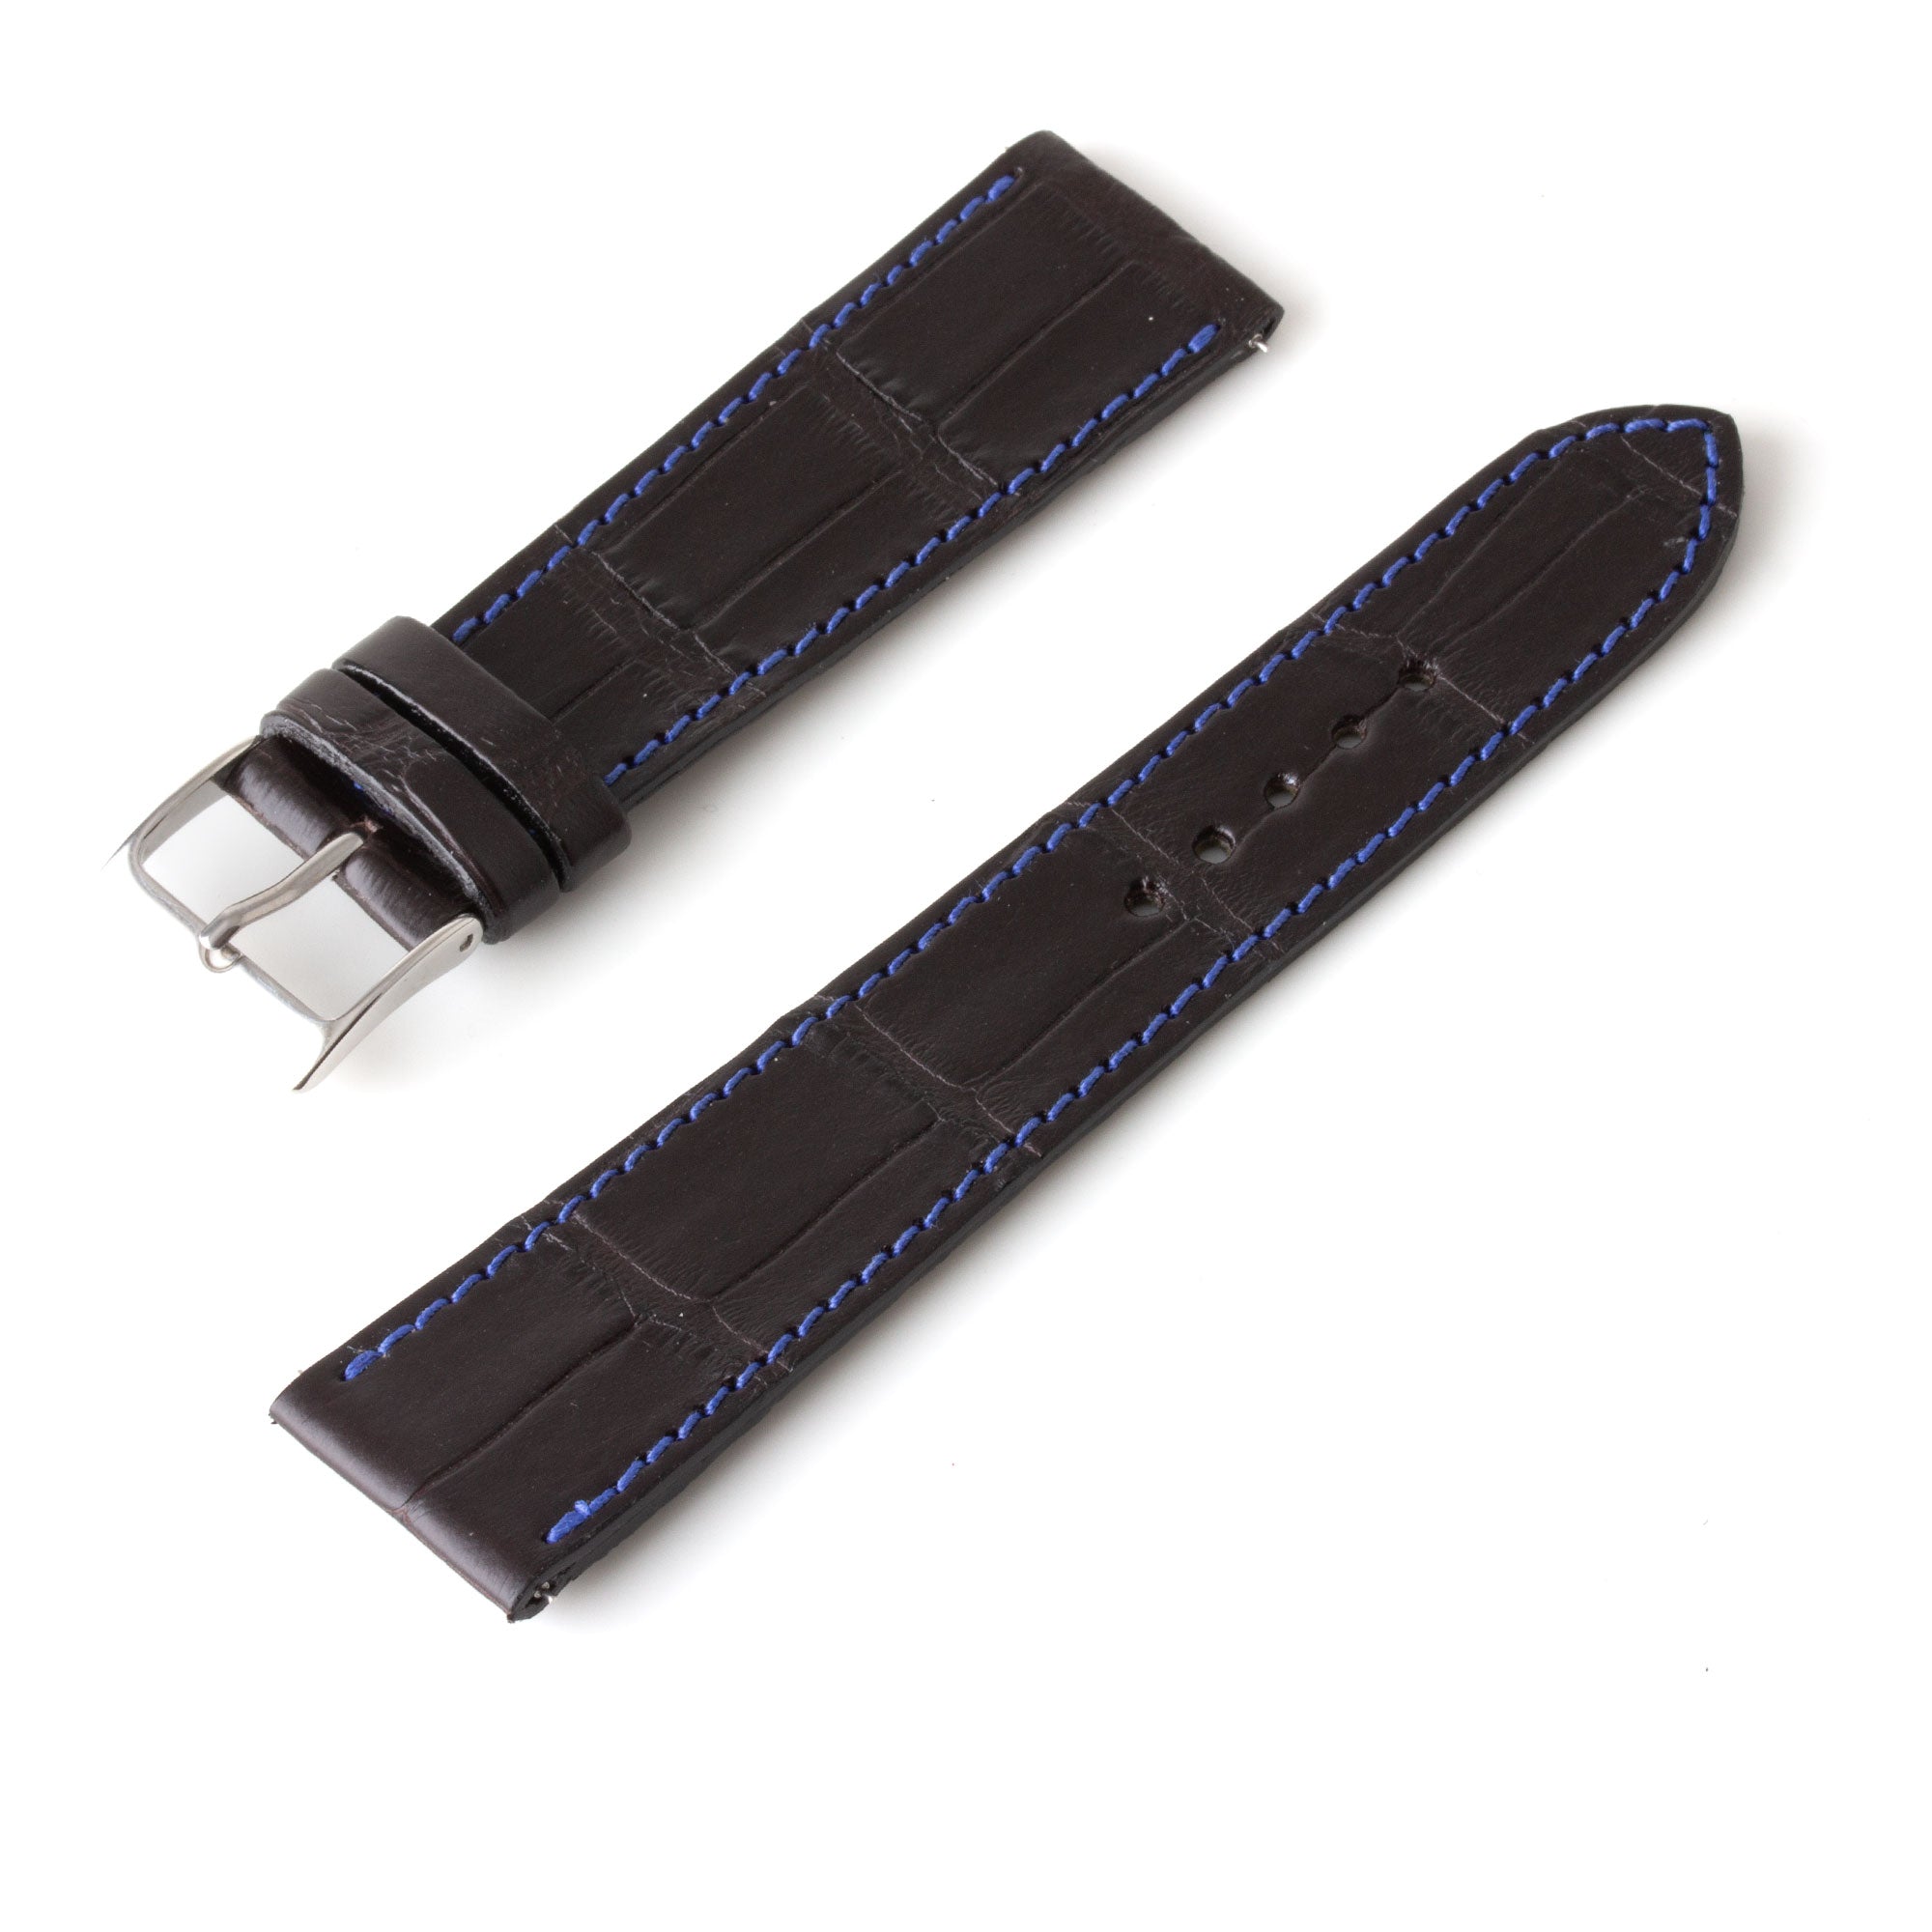 Alligator "Solo" leather watch band - 22mm width (0.87 inches) / Size M (n° 7)